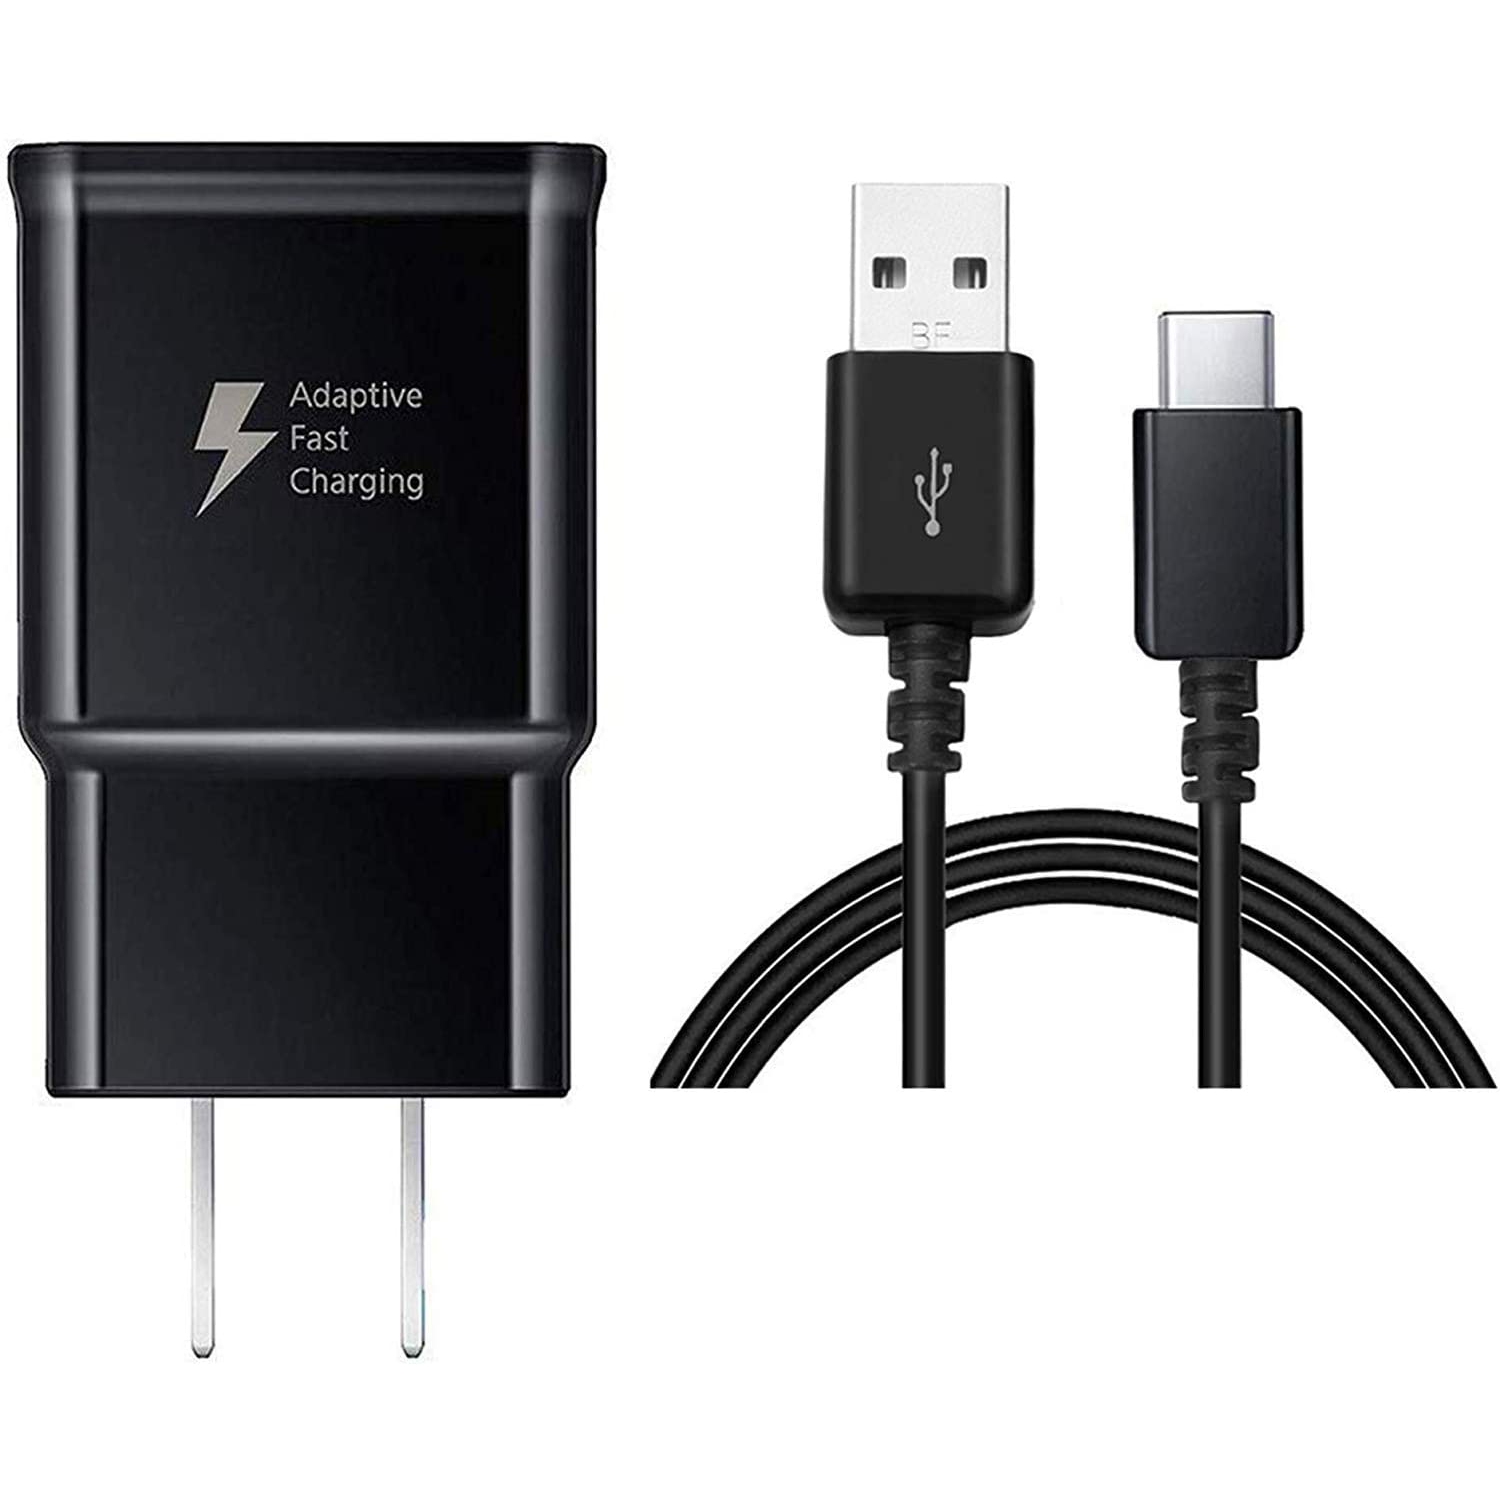 Fast Adaptive Charging Wall Charger & USB-C Cable for Samsung S8 S9 S10 Note 8 9 Google Pixel LG Moto, Black